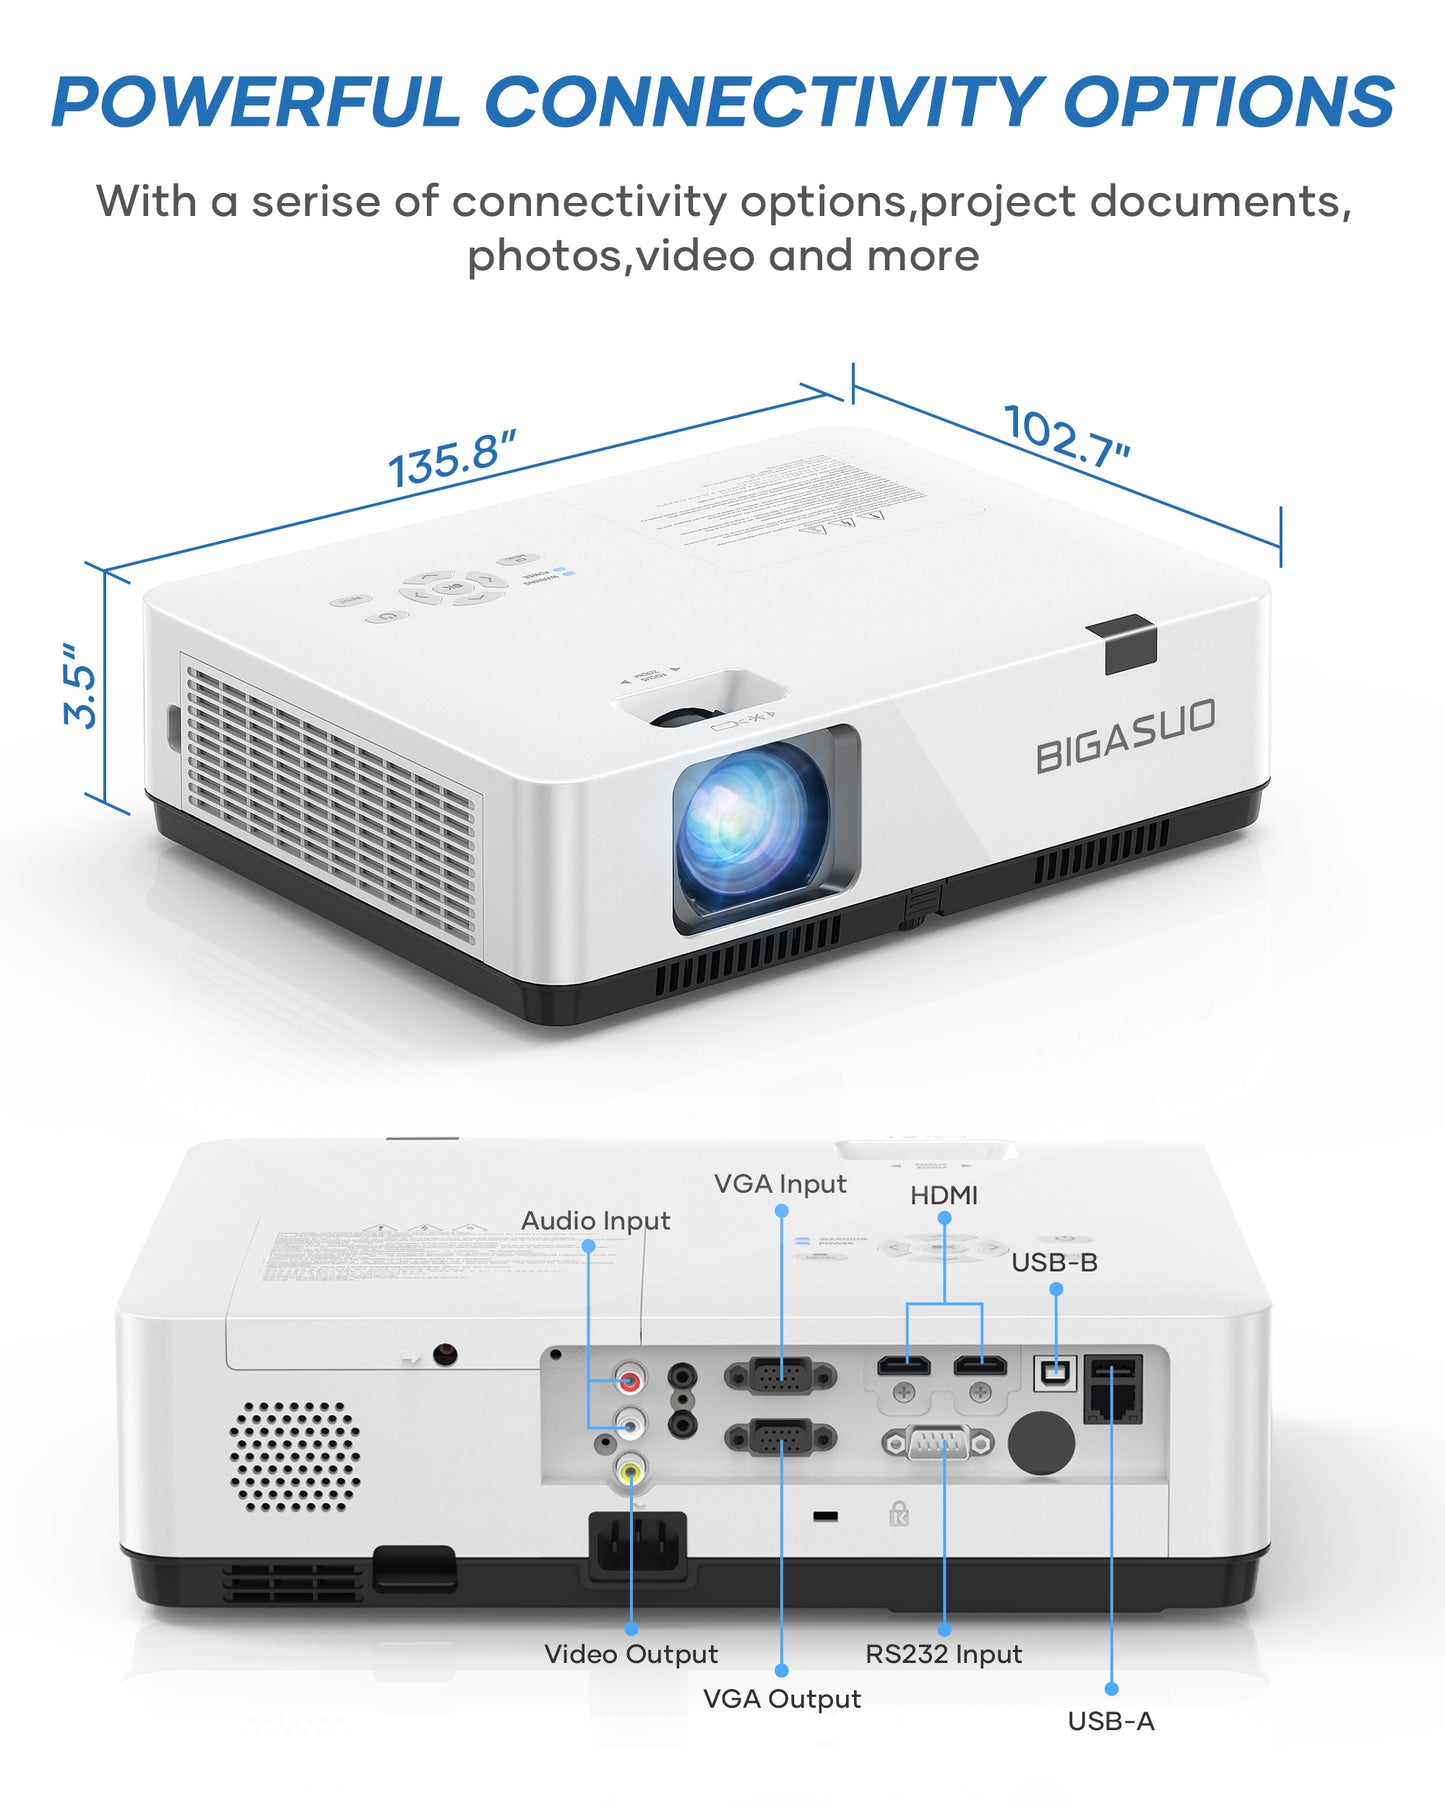 BIGASUO F-1080P 3-Chip 3LCD Business Projector